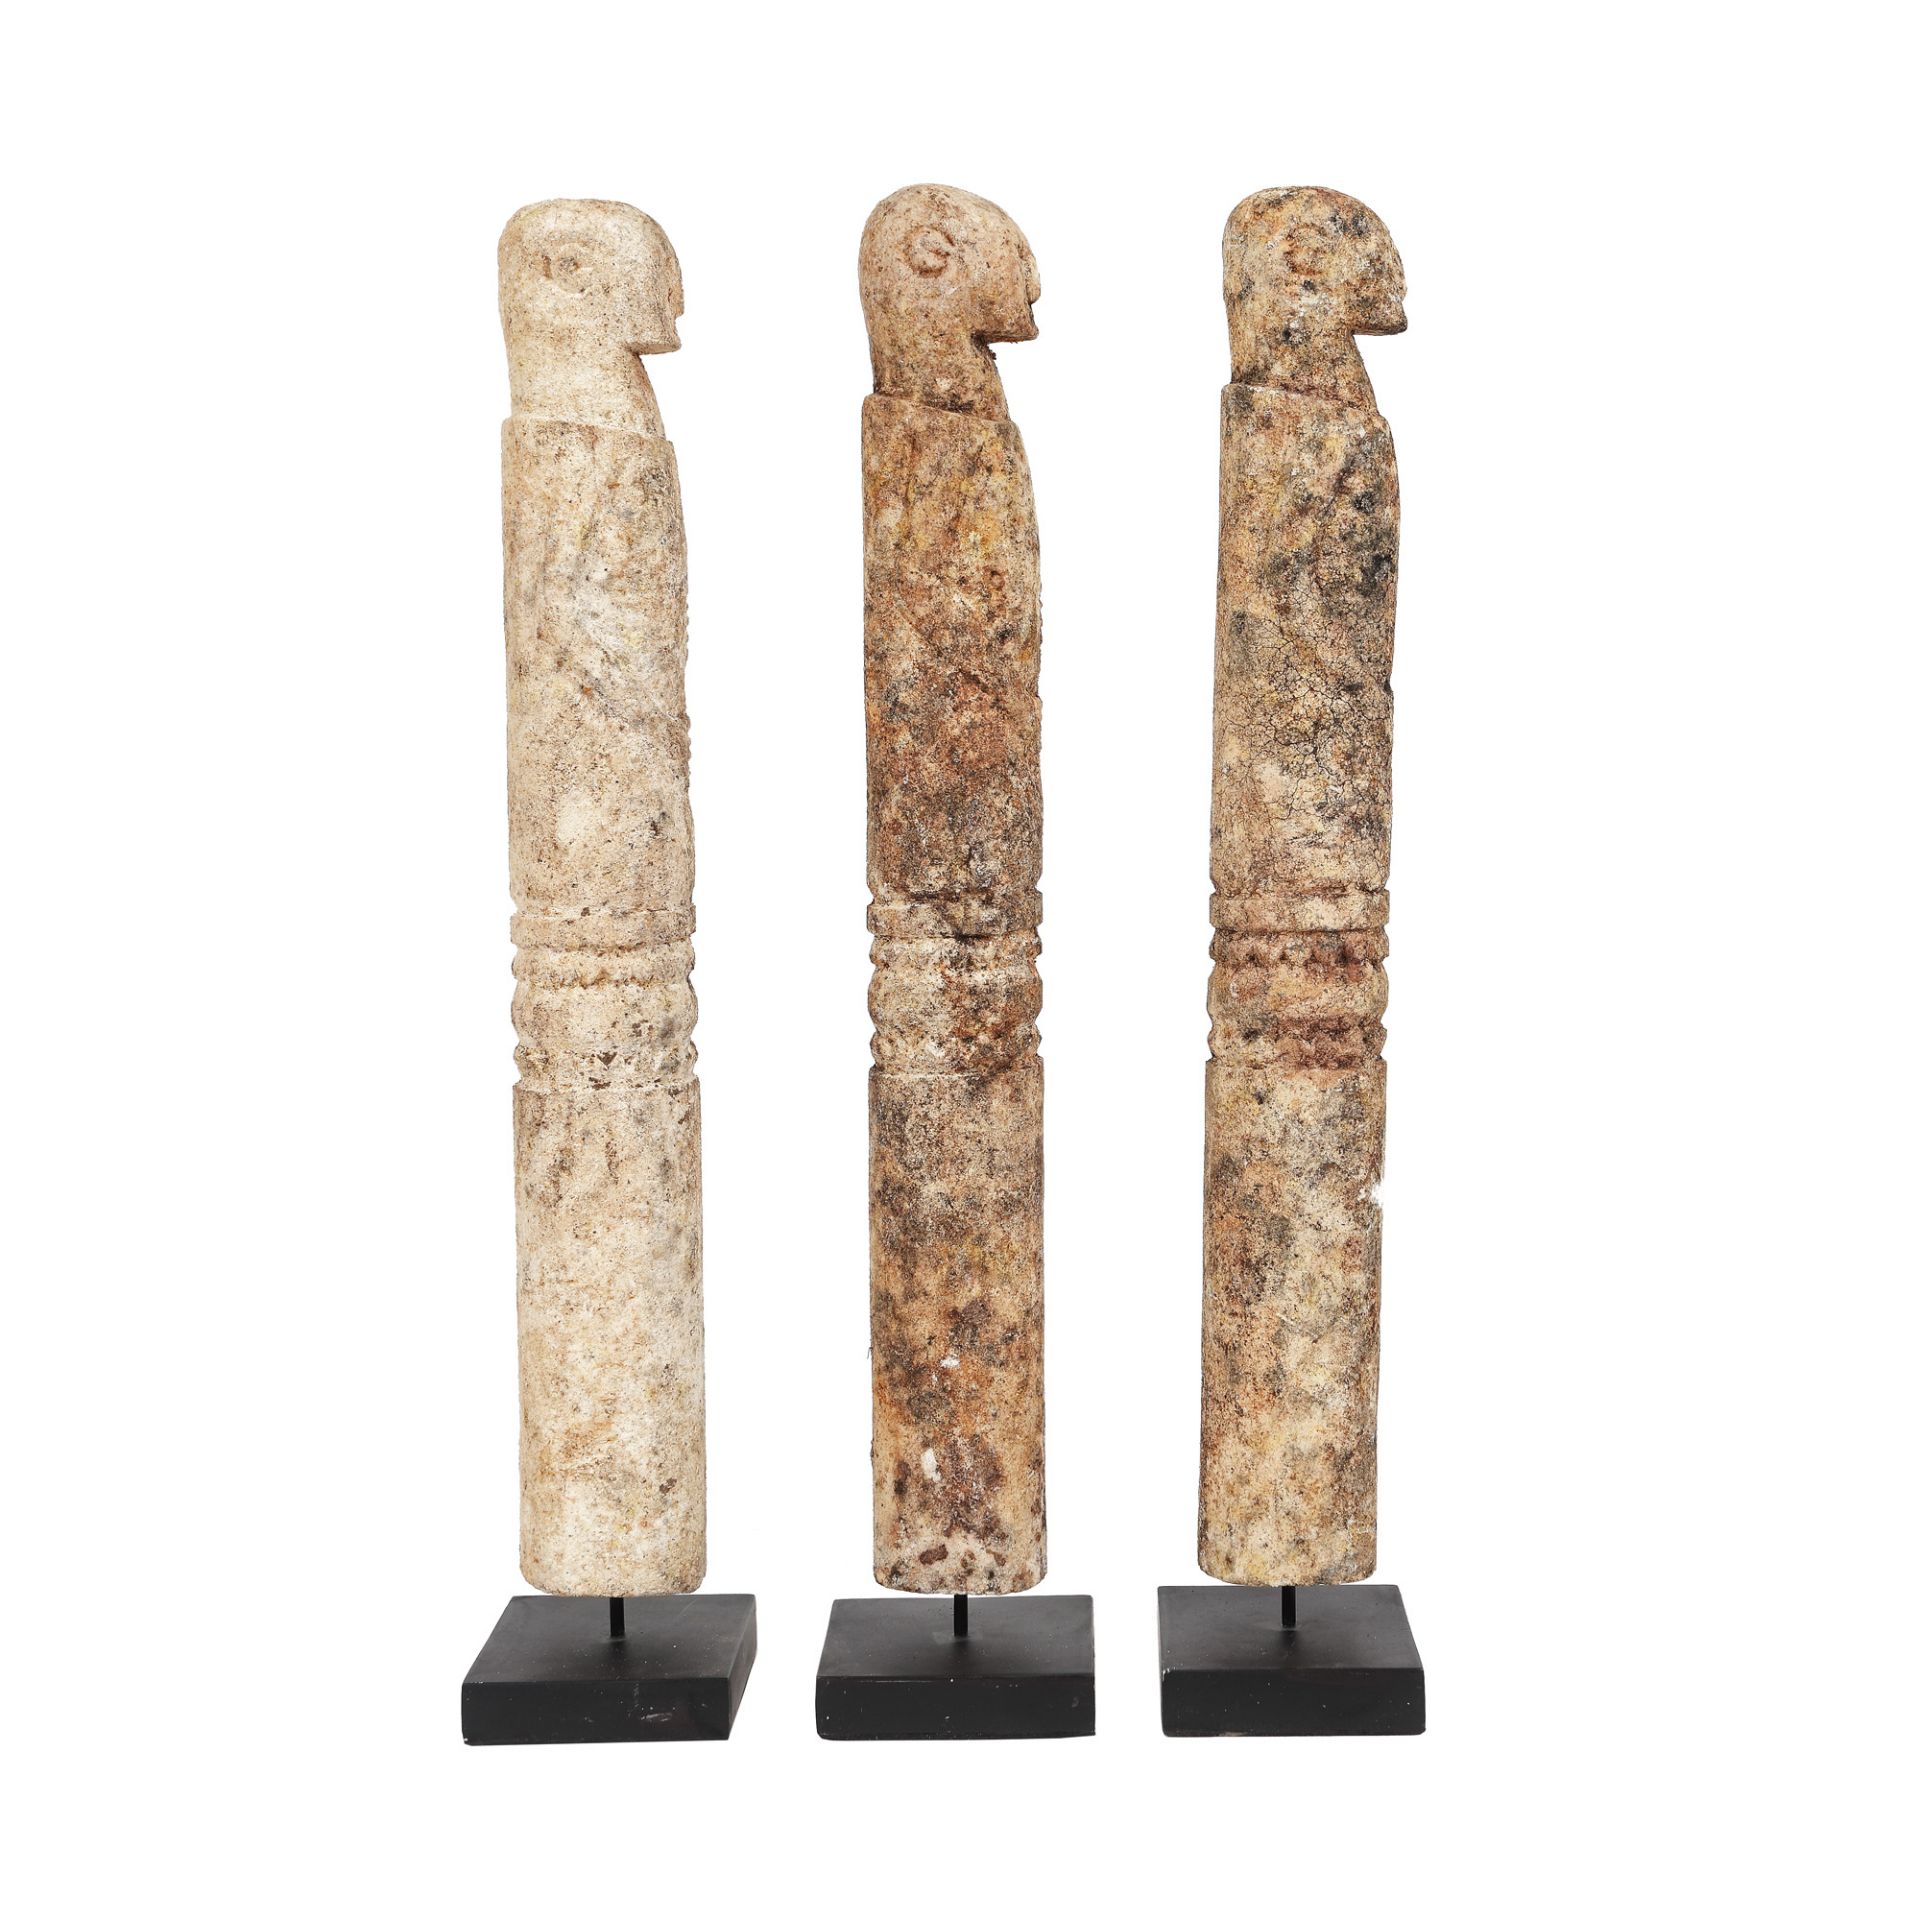 Three stone statuettes, possibly Timor, Indonesia - Image 2 of 3